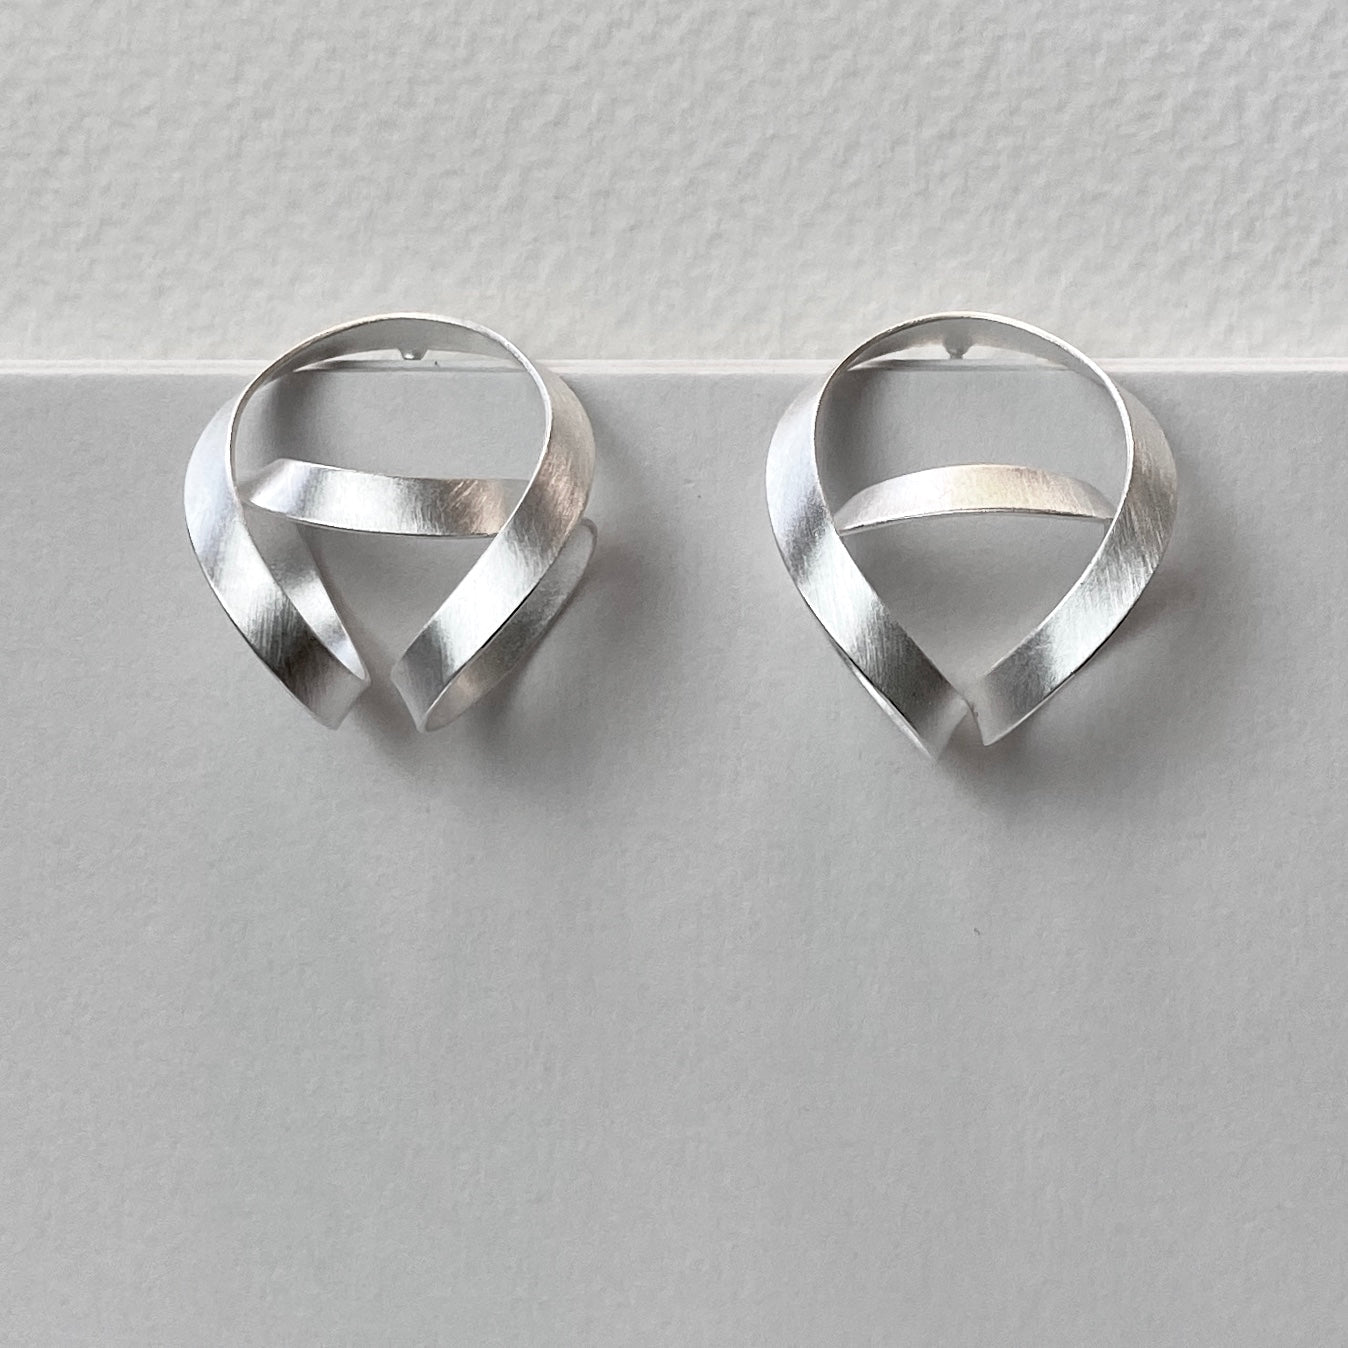 Beautifully Wound Satin Silver Earrings - The Nancy Smillie Shop - Art, Jewellery & Designer Gifts Glasgow